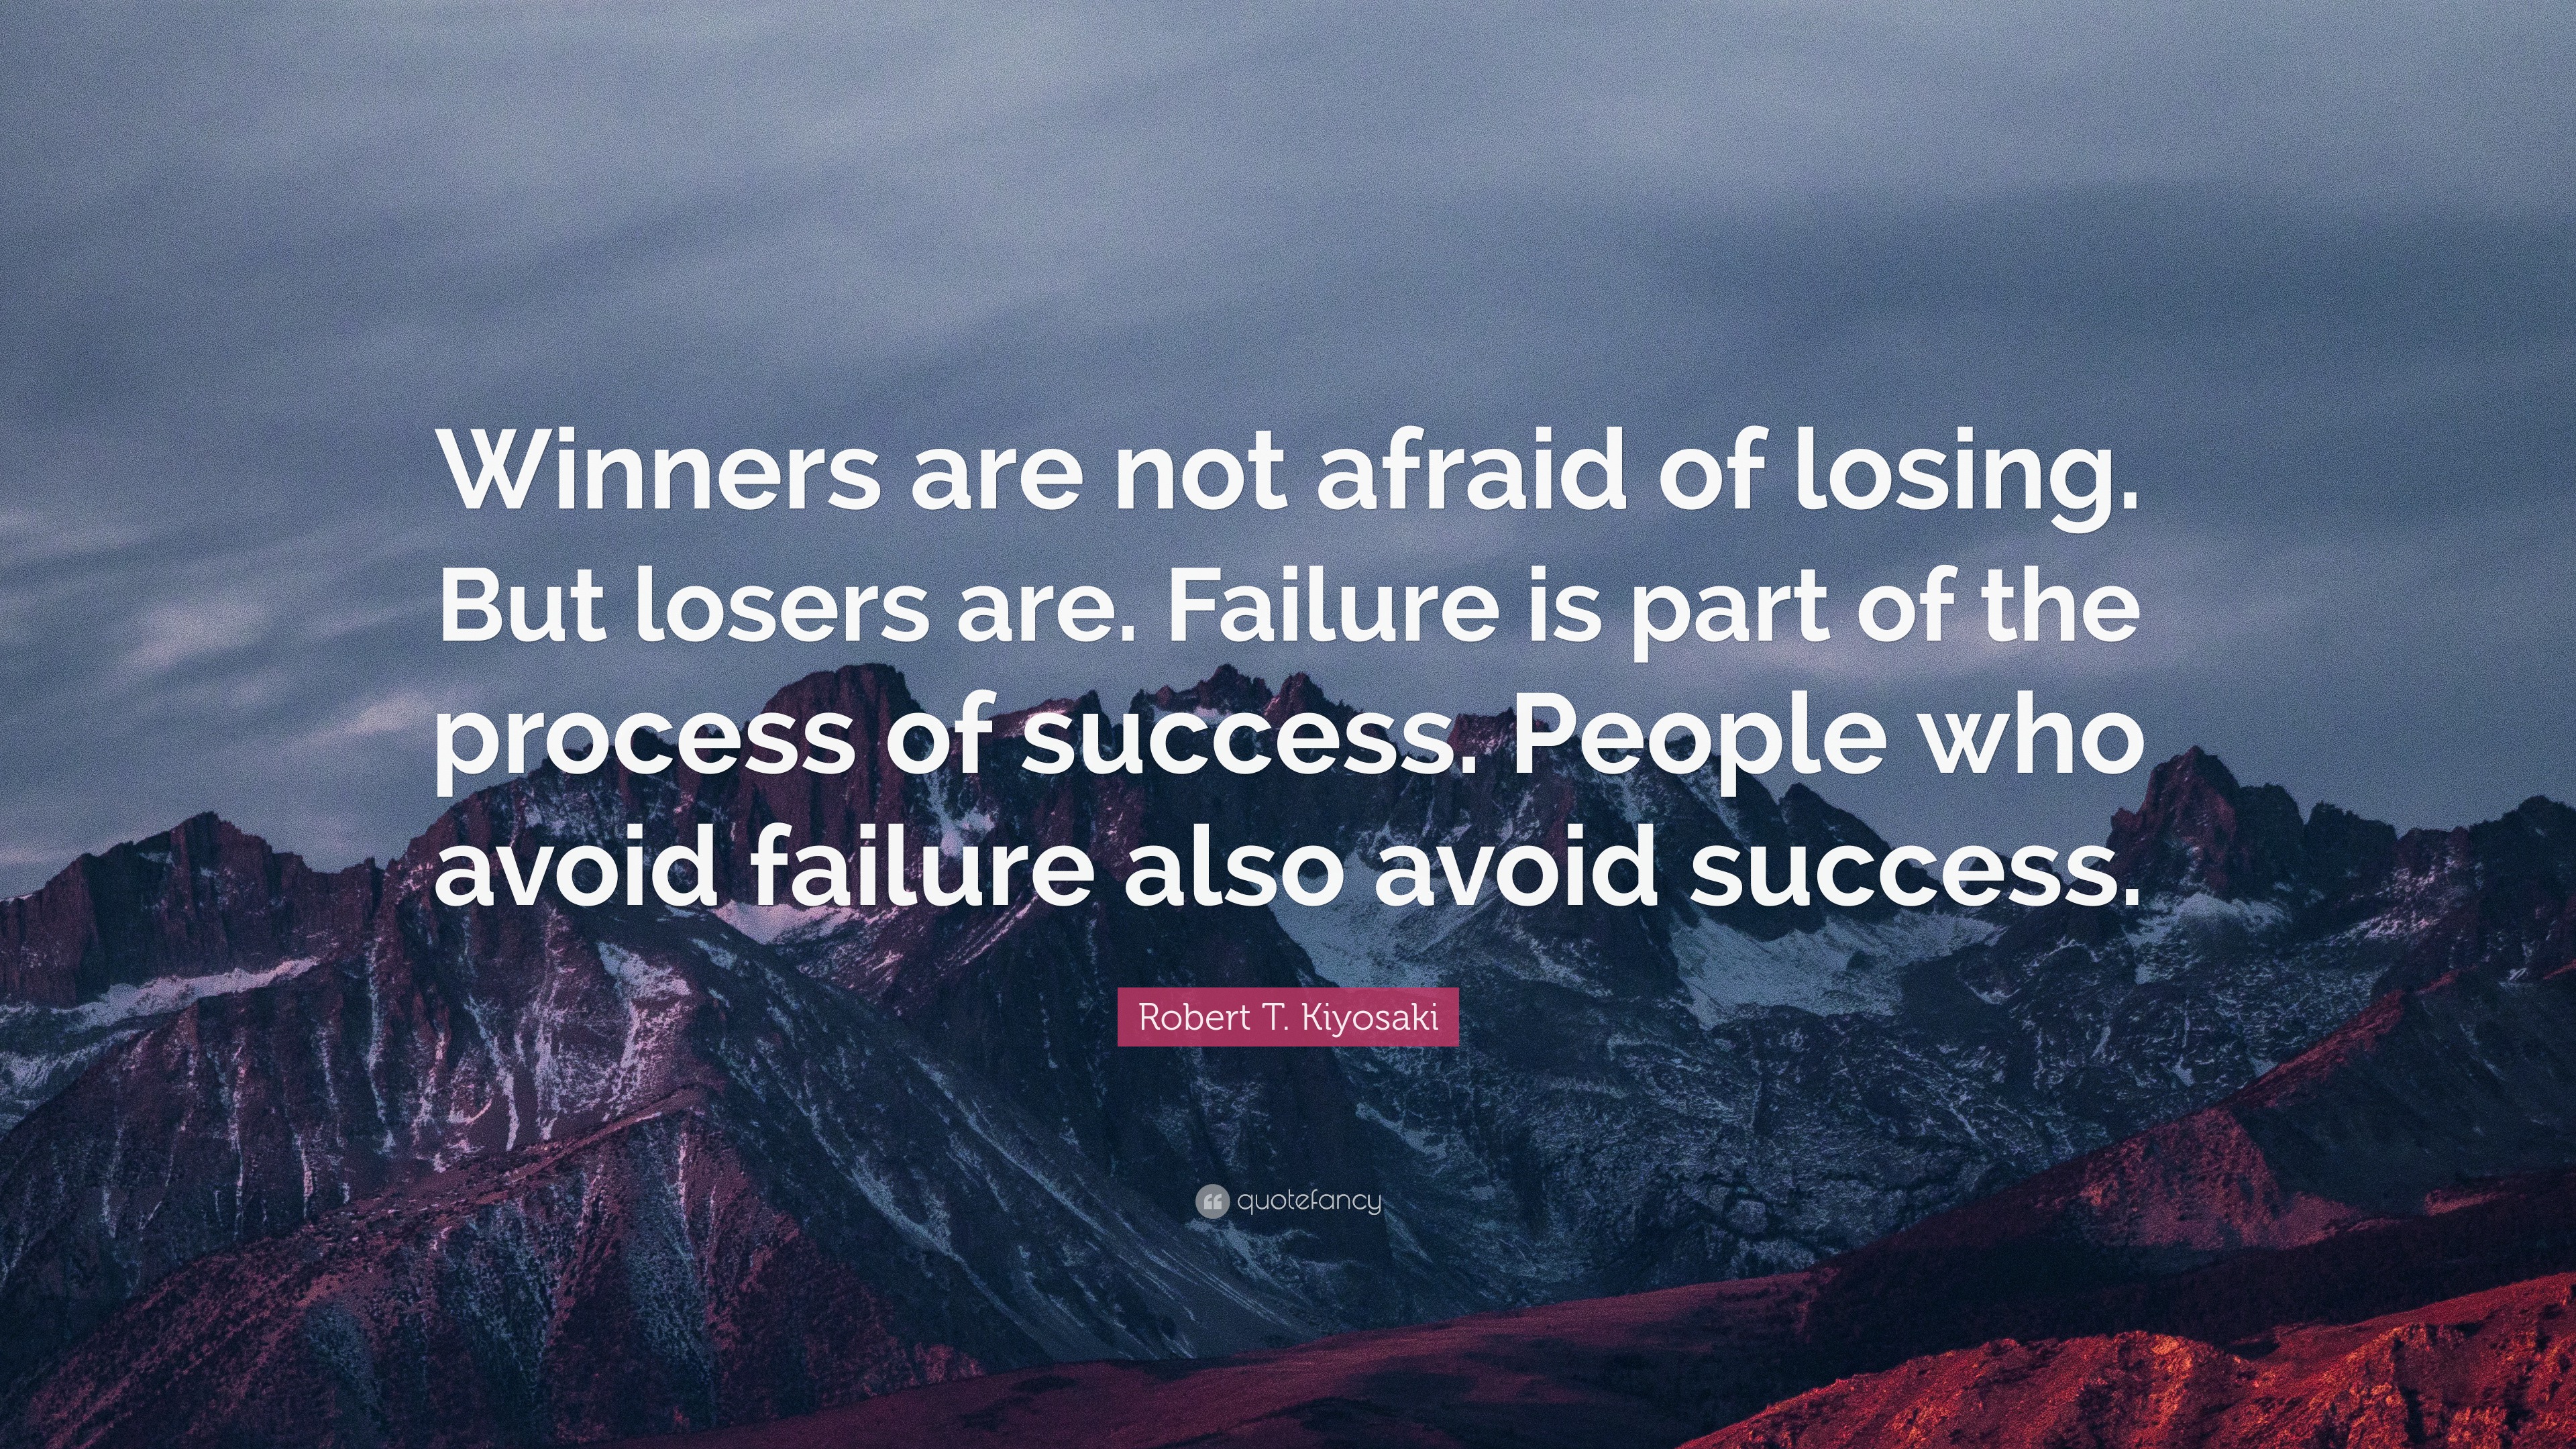 Anybody who is not afraid to fail is a winner